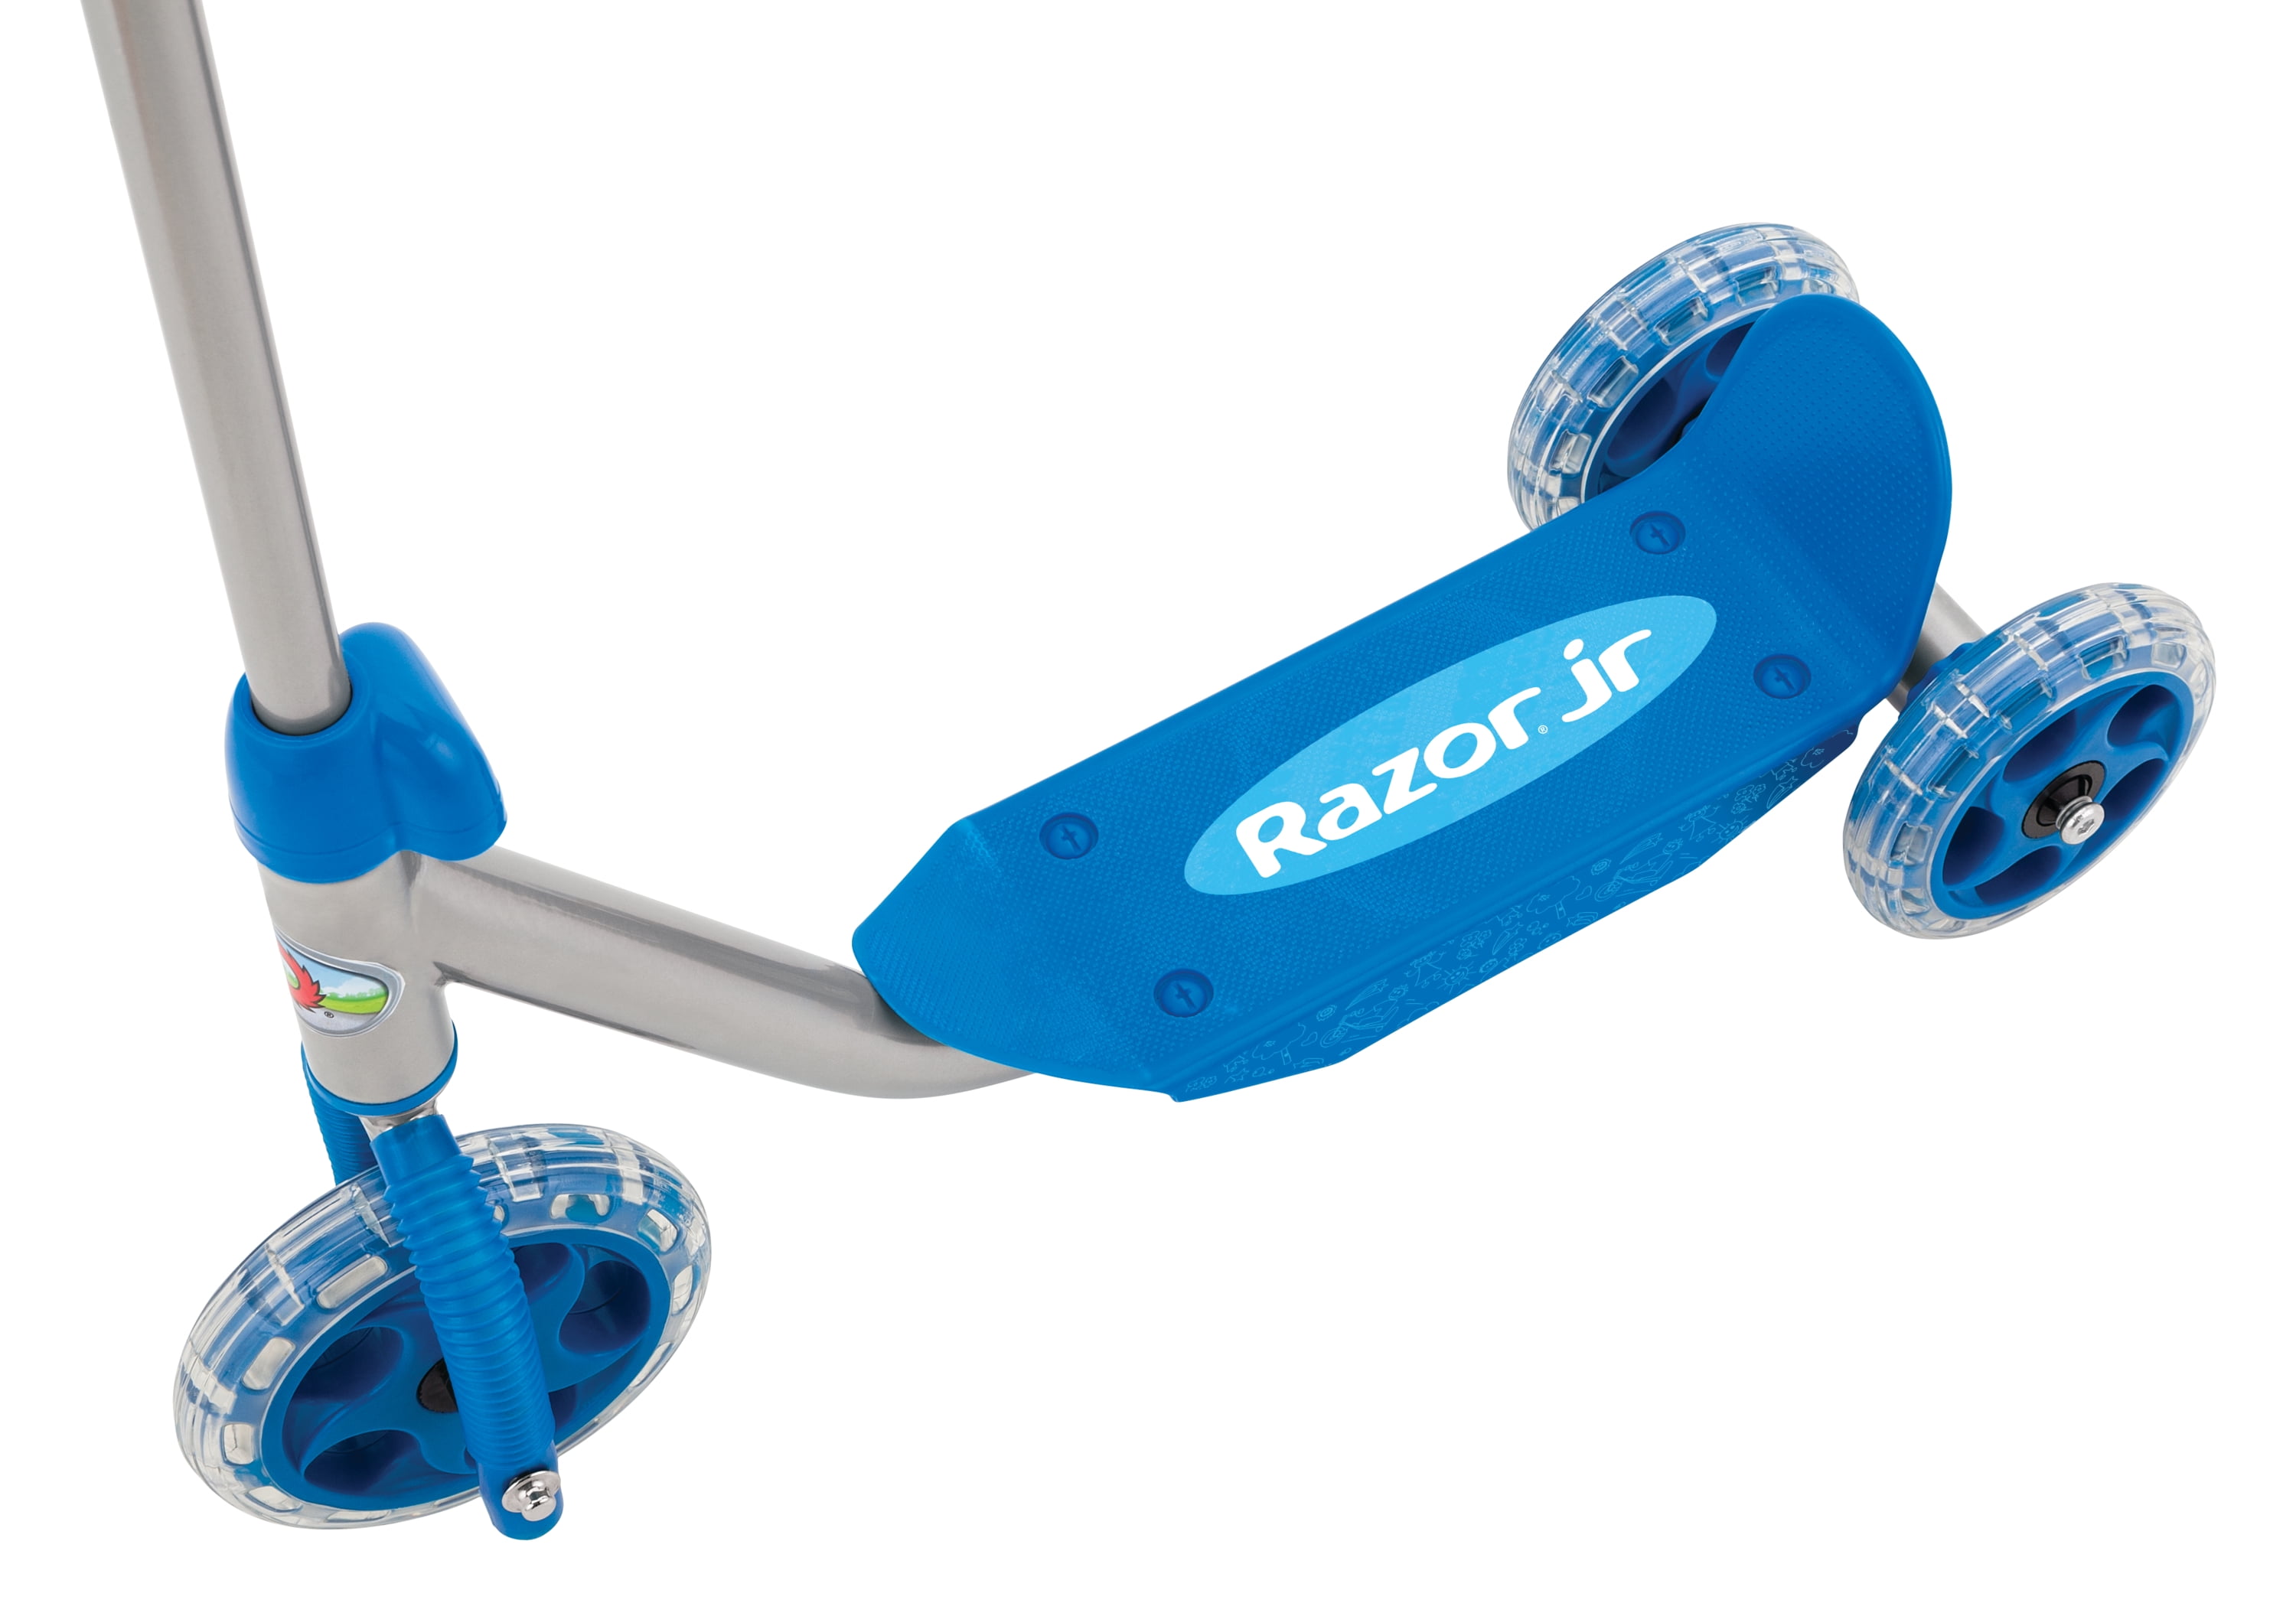 Razor Jr 3-Wheel Lil' Kick Scooter - For Ages 3 and up, Blue 